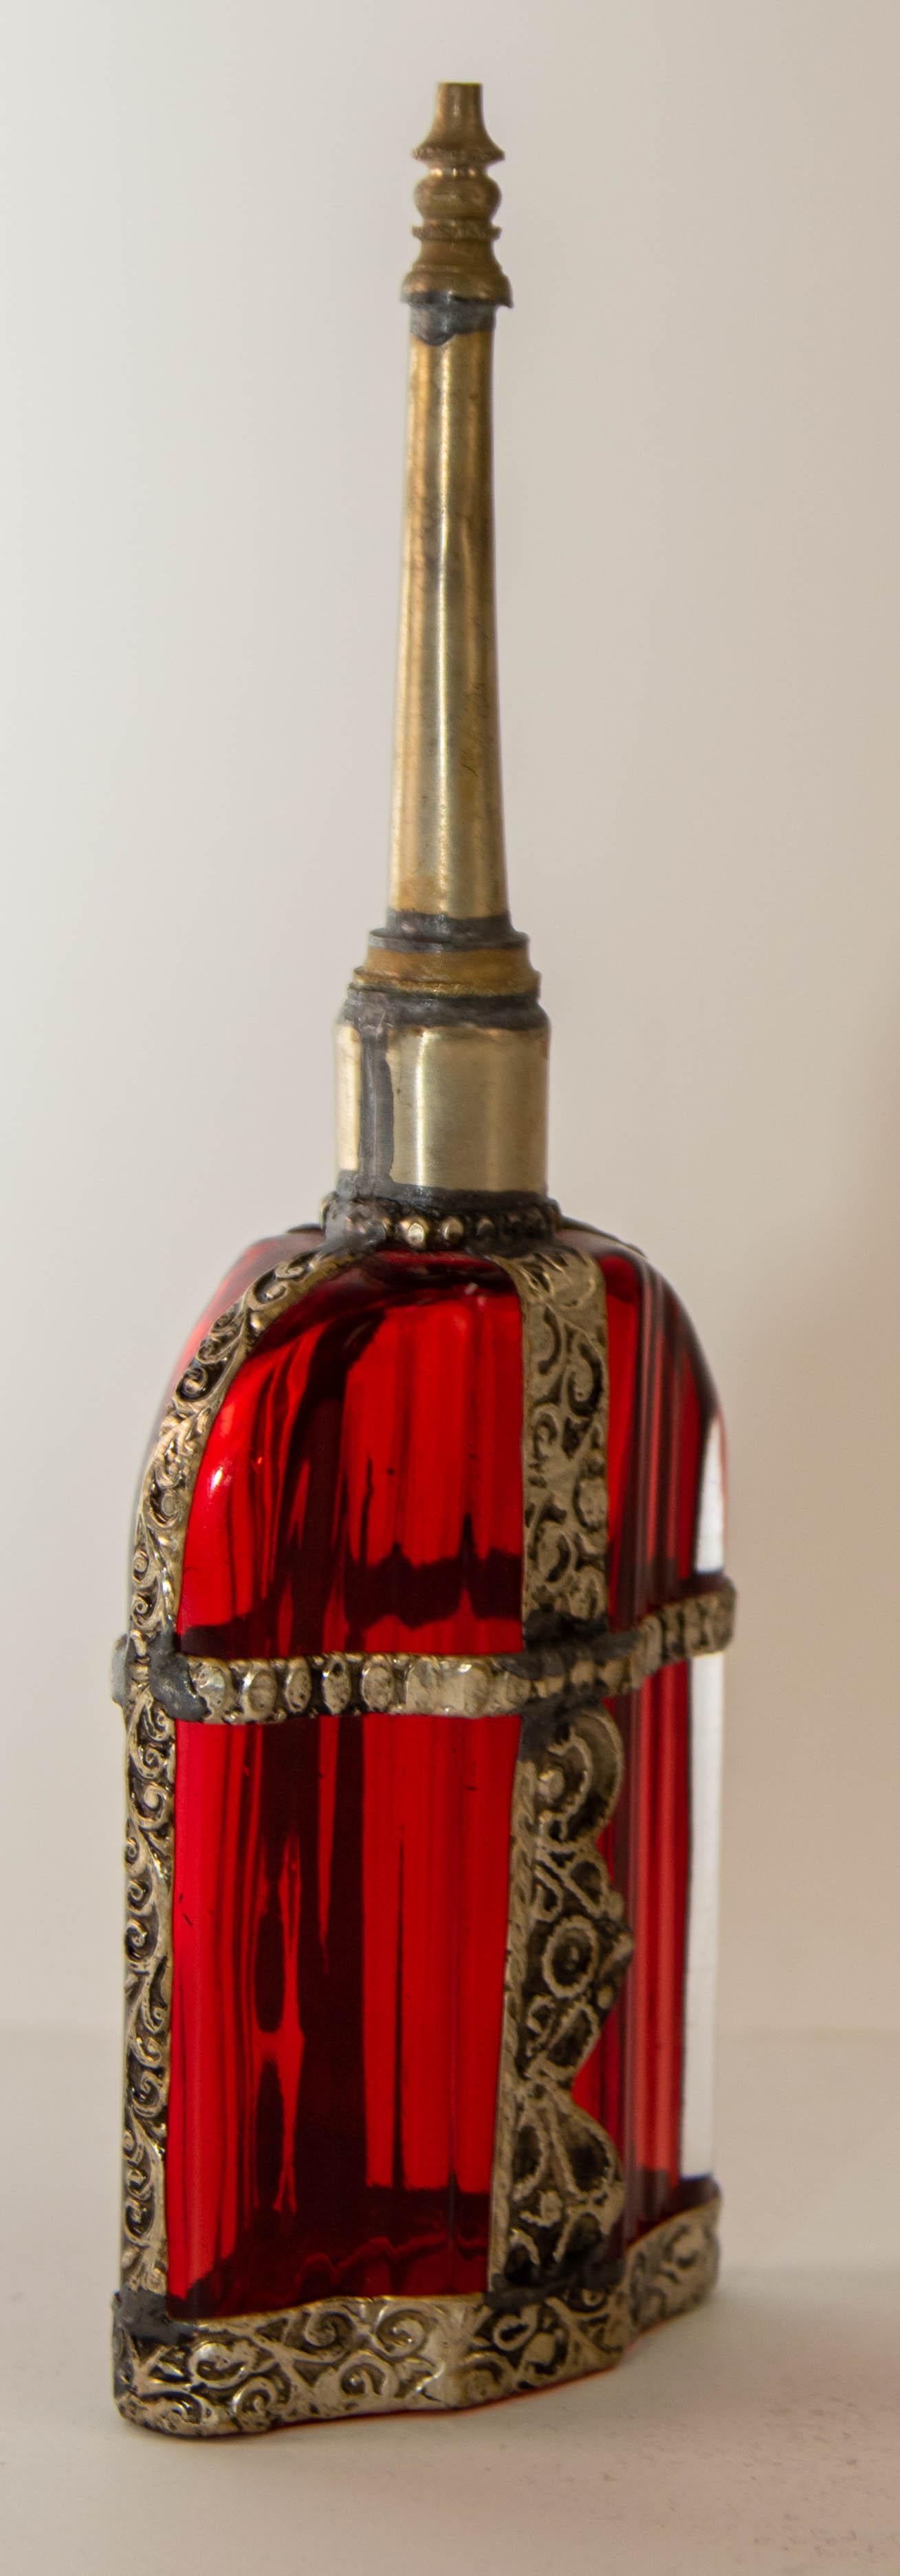 Hand-Crafted Moroccan Perfume Bottle Sprinkler with Embossed Metal Overlay and Red Glass